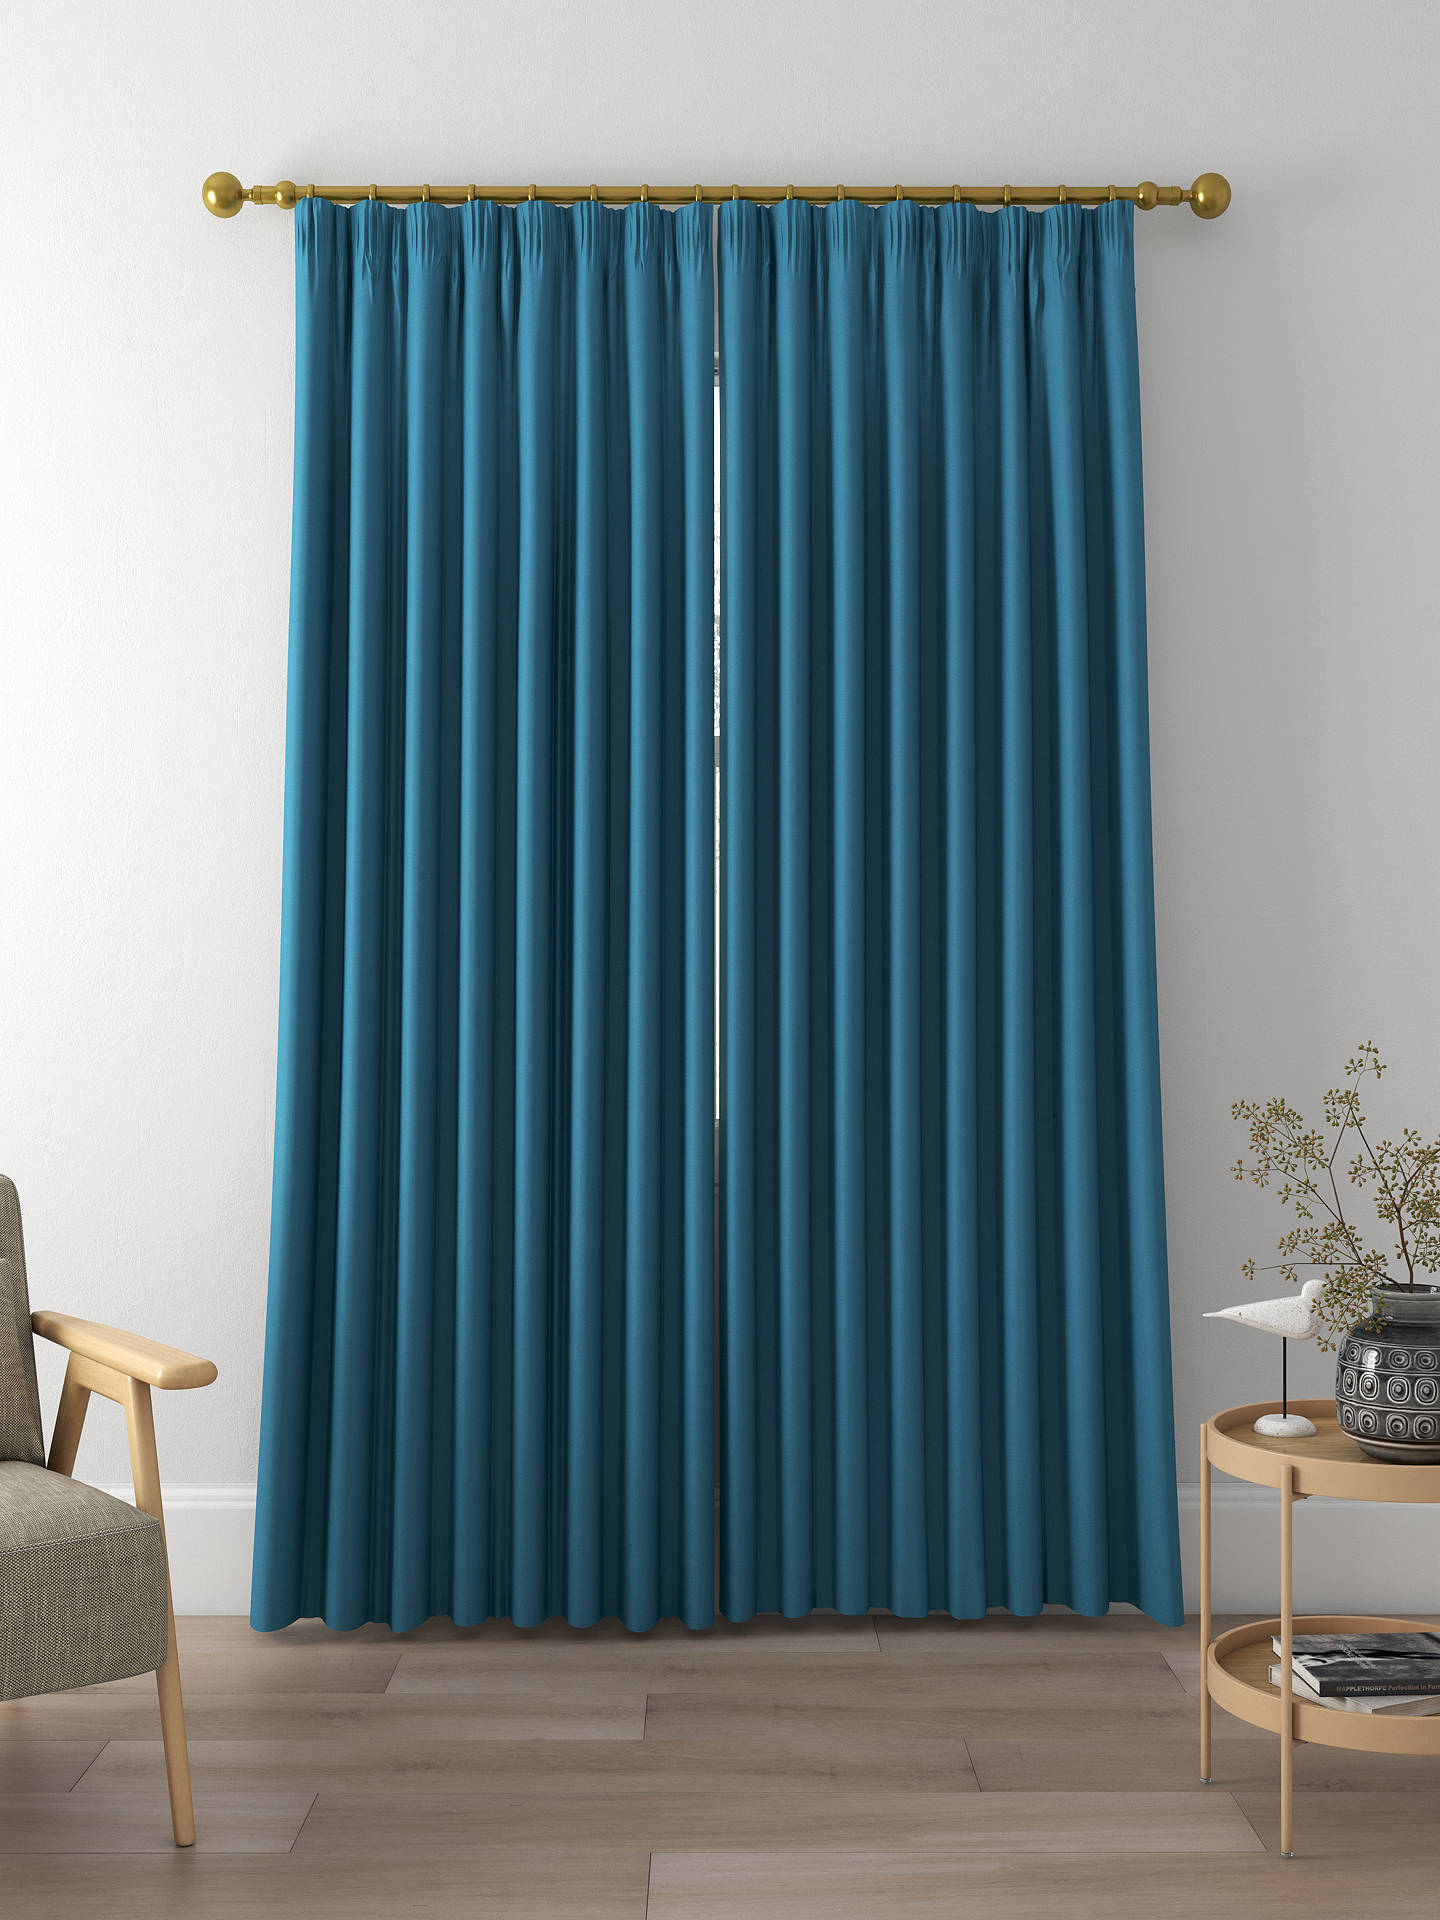 Sanderson Tuscany II Made to Measure Curtains, Cobalt